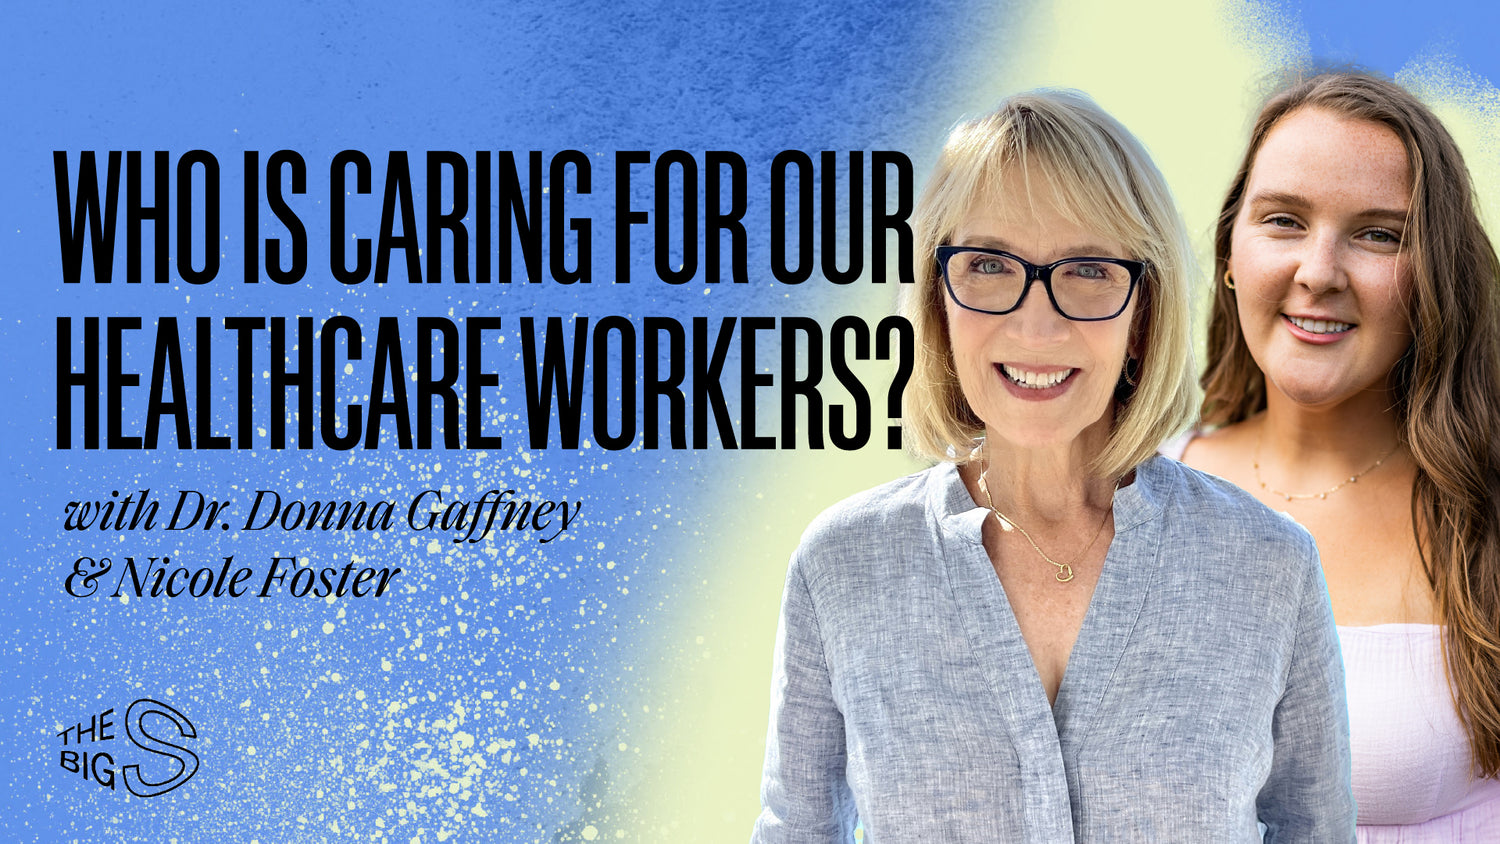 81. WHO IS CARING FOR OUR HEALTHCARE WORKERS? MENTAL HEALTH & NURSING WITH DR. DONNA GAFFNEY & NICOLE FOSTER